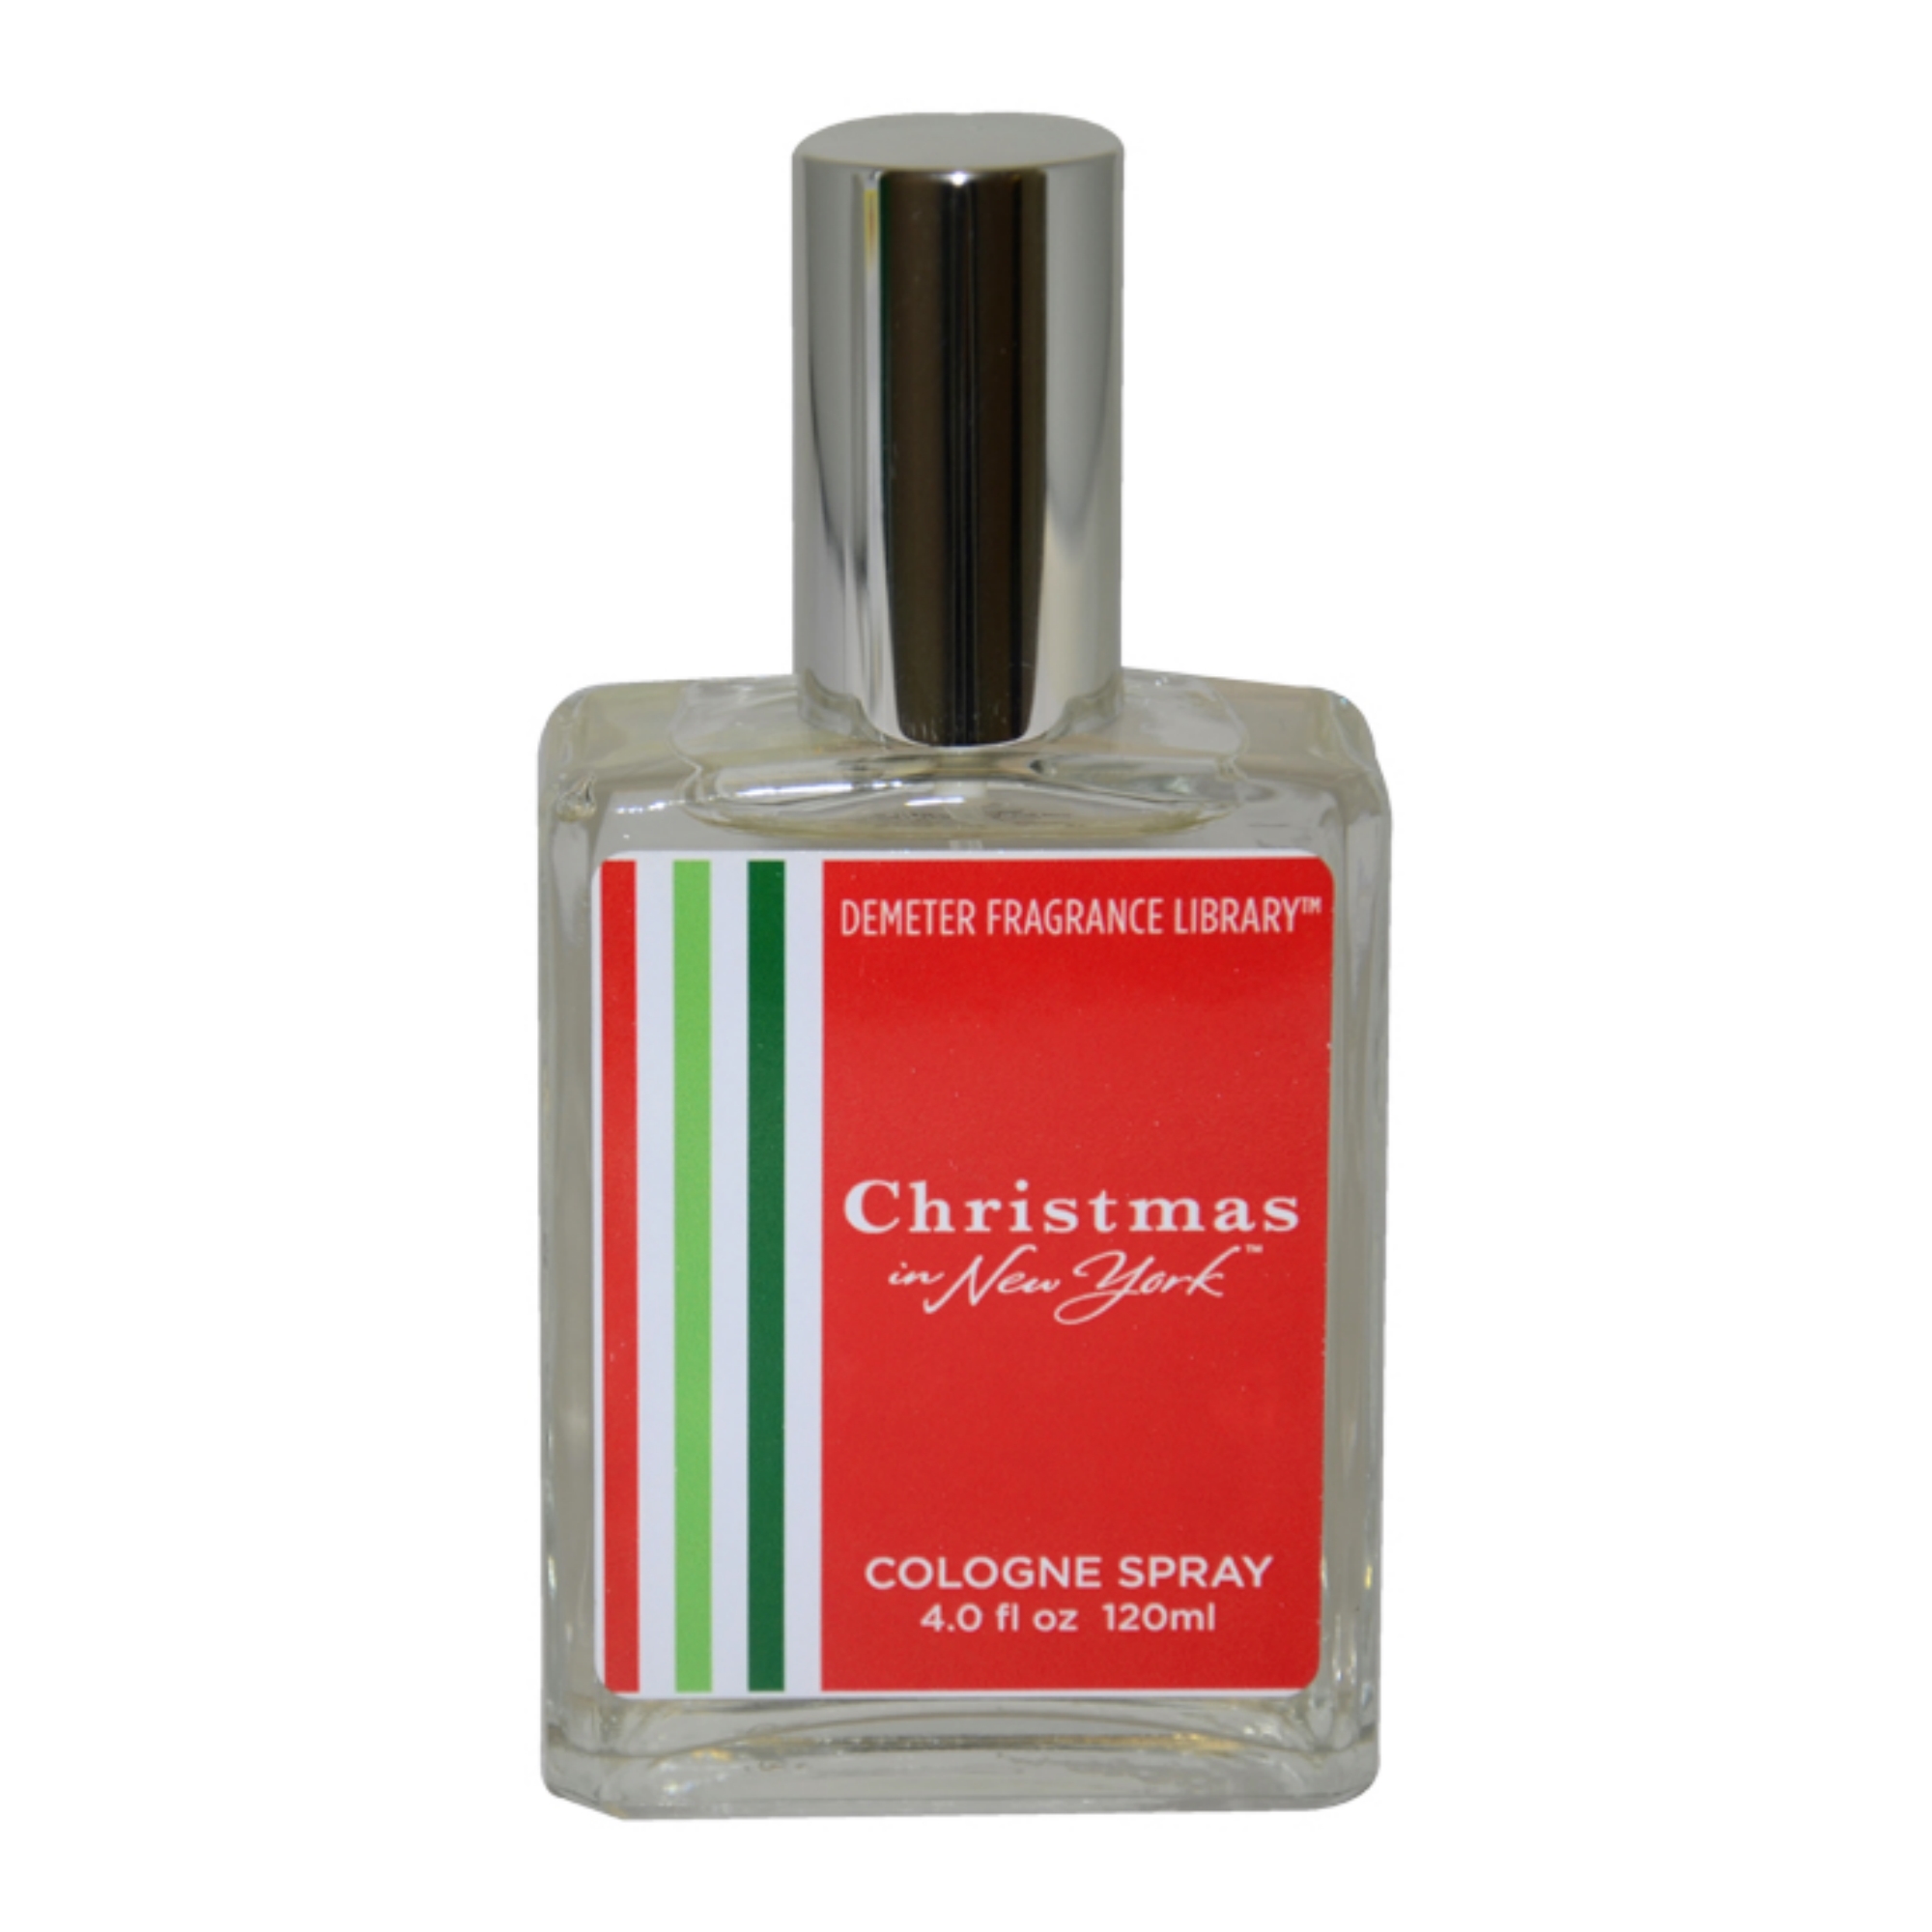 Christmas In New York by Demeter for Unisex - 4 oz Cologne Spray